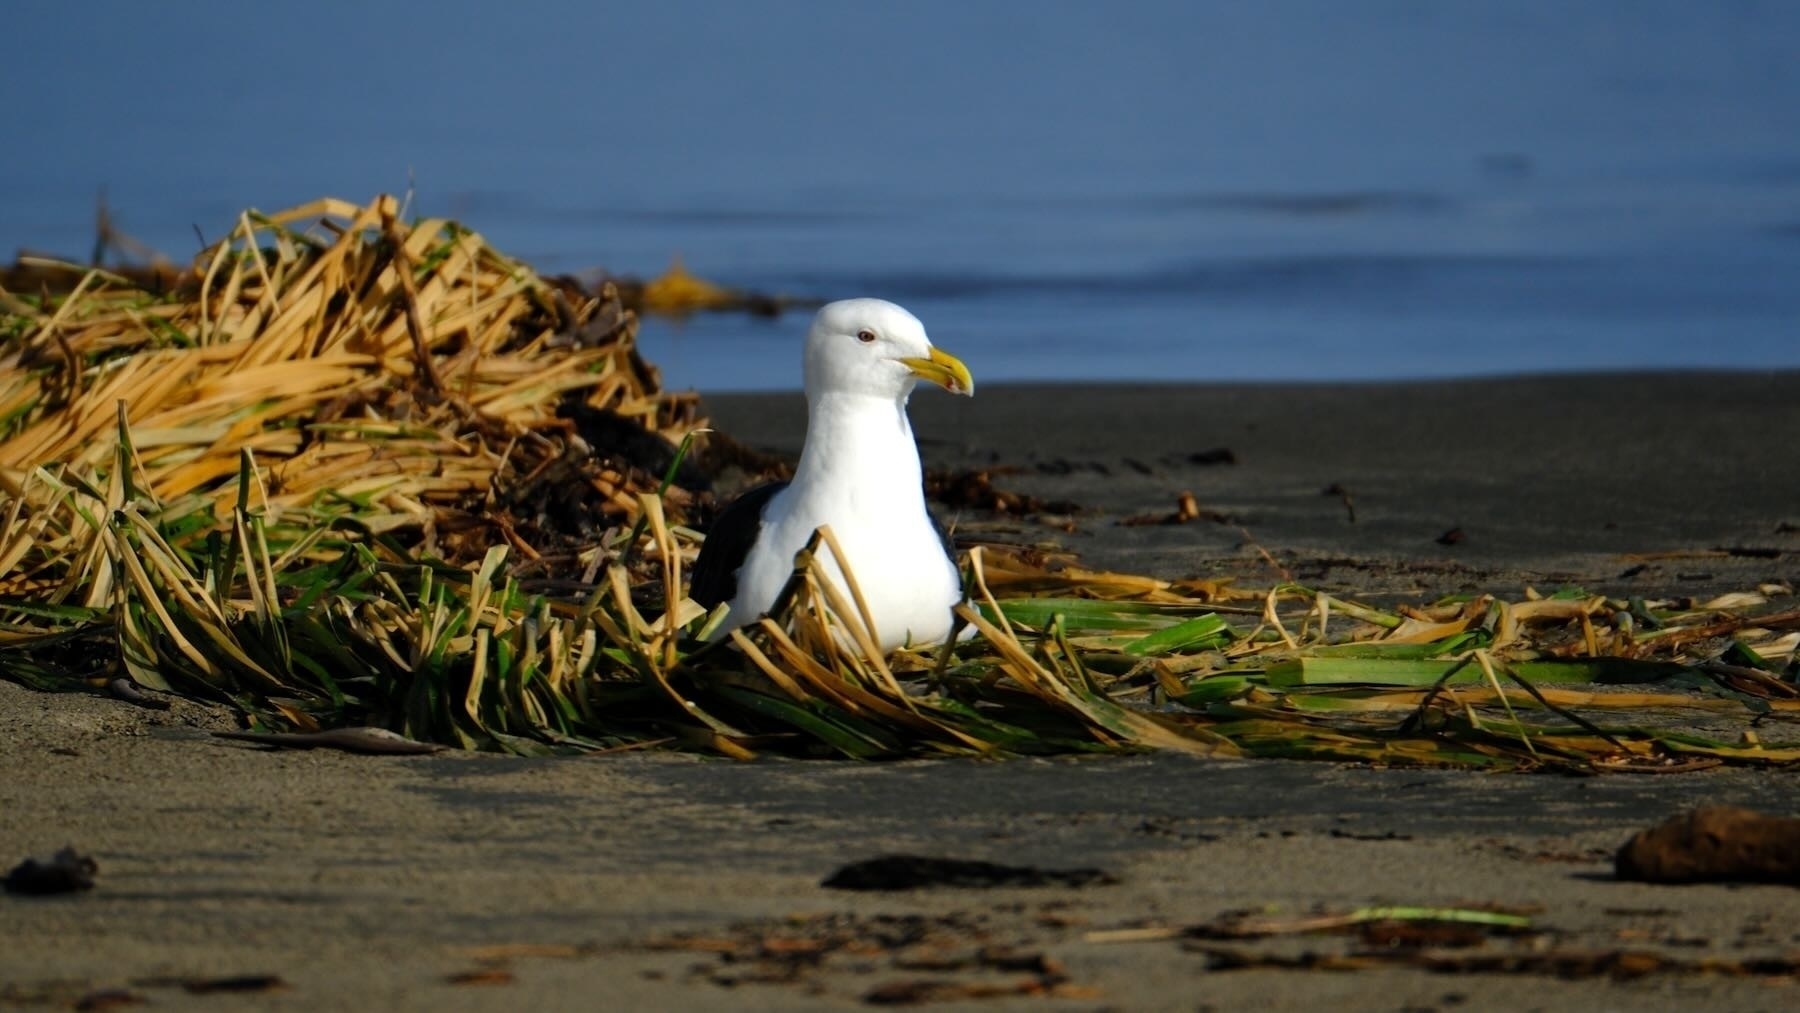 Black-backed gull sitting in a clump of river weed.